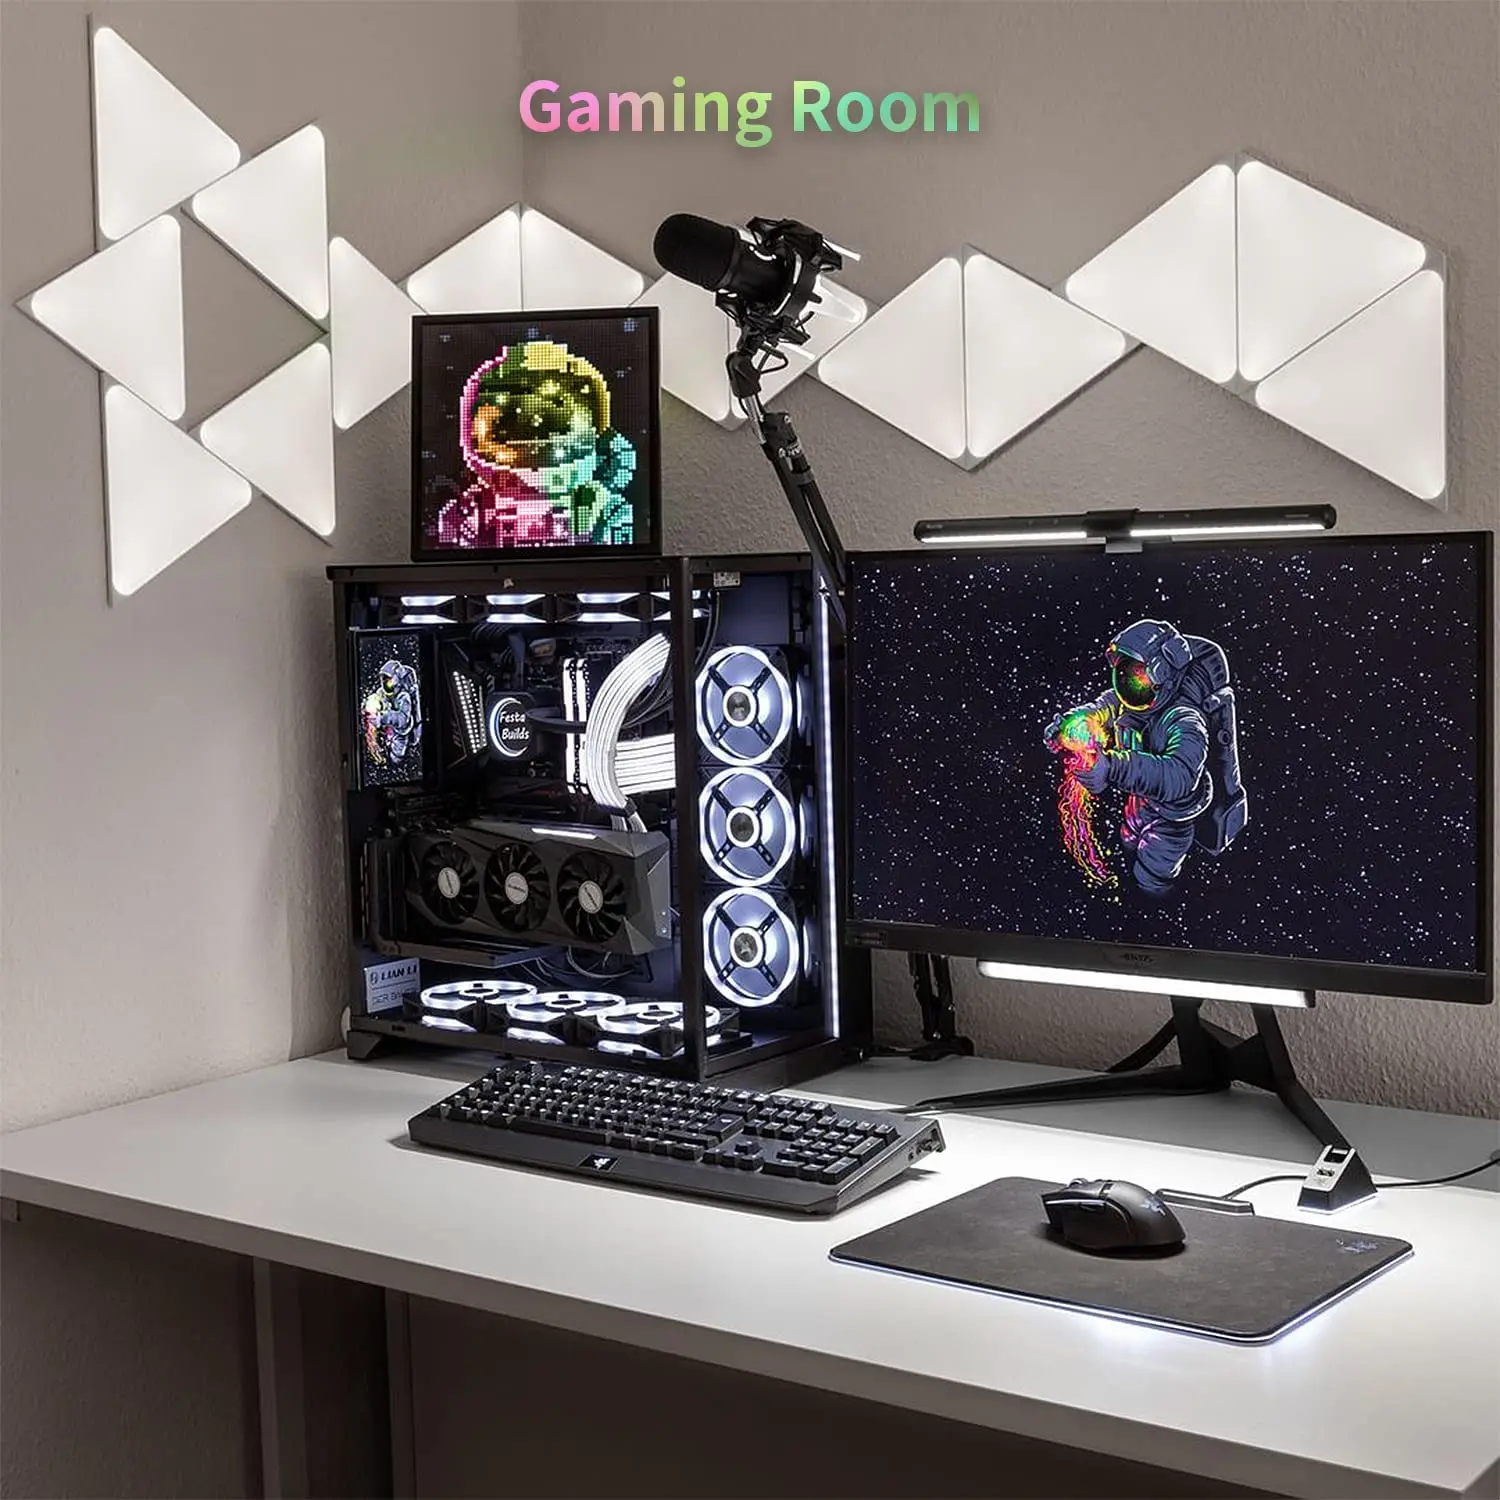 Divoom-Pixoo 64 WiFi Pixel Art Display, Cloud Digital Frame with Andrea Control, LED Panel for Gaming Room Decoration